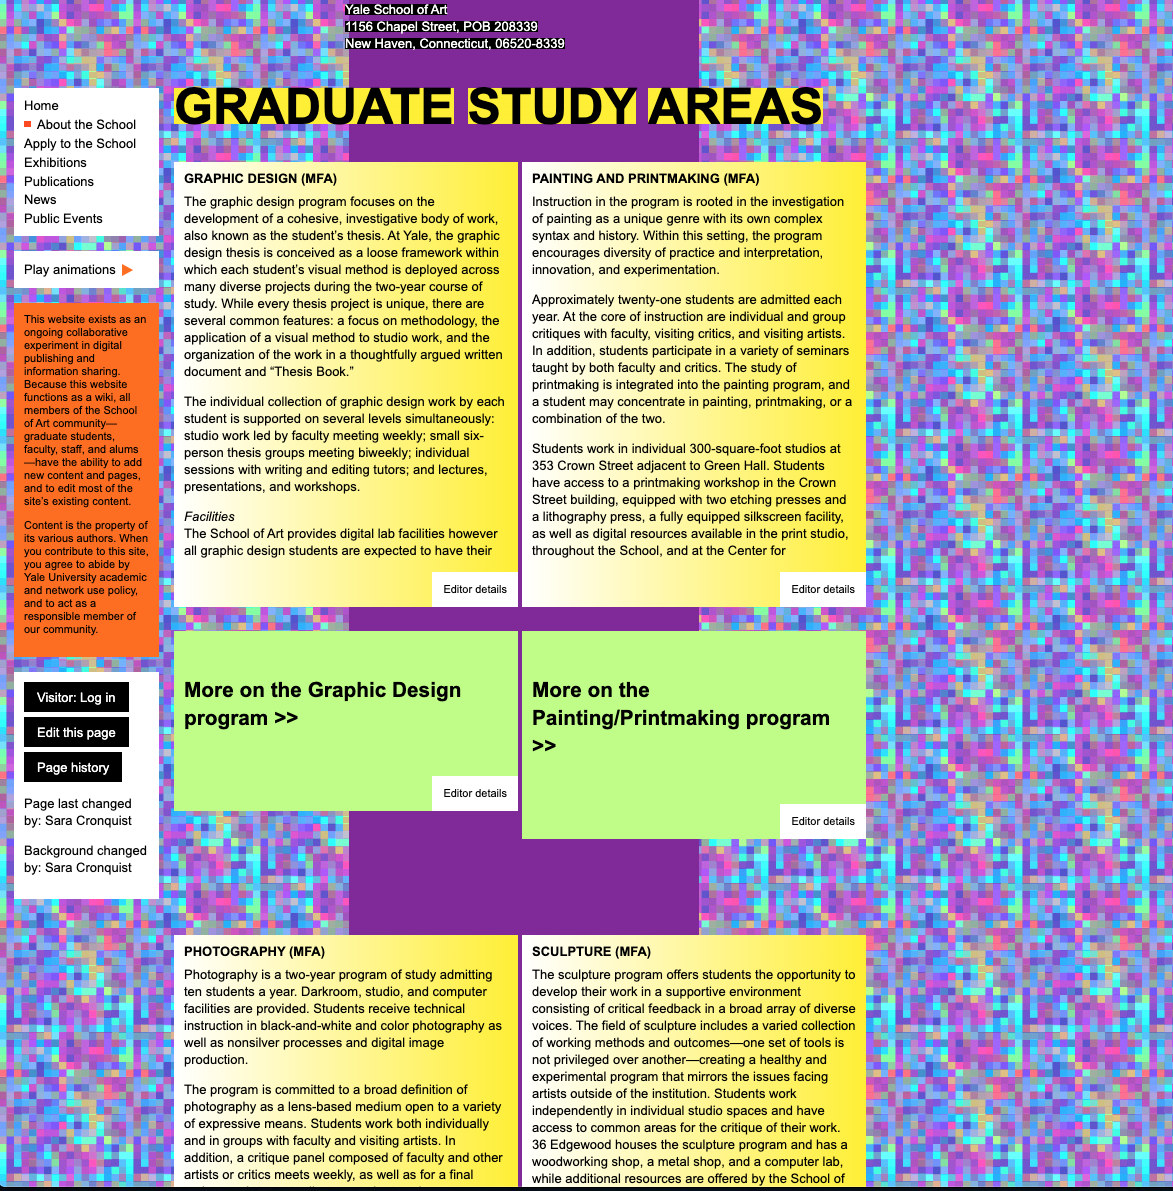 The Graduate Study Areas page from the Yale School of Art website. The background is an image of purple and blue pixels. Paragraphs of content are on yellow squares with black text. 